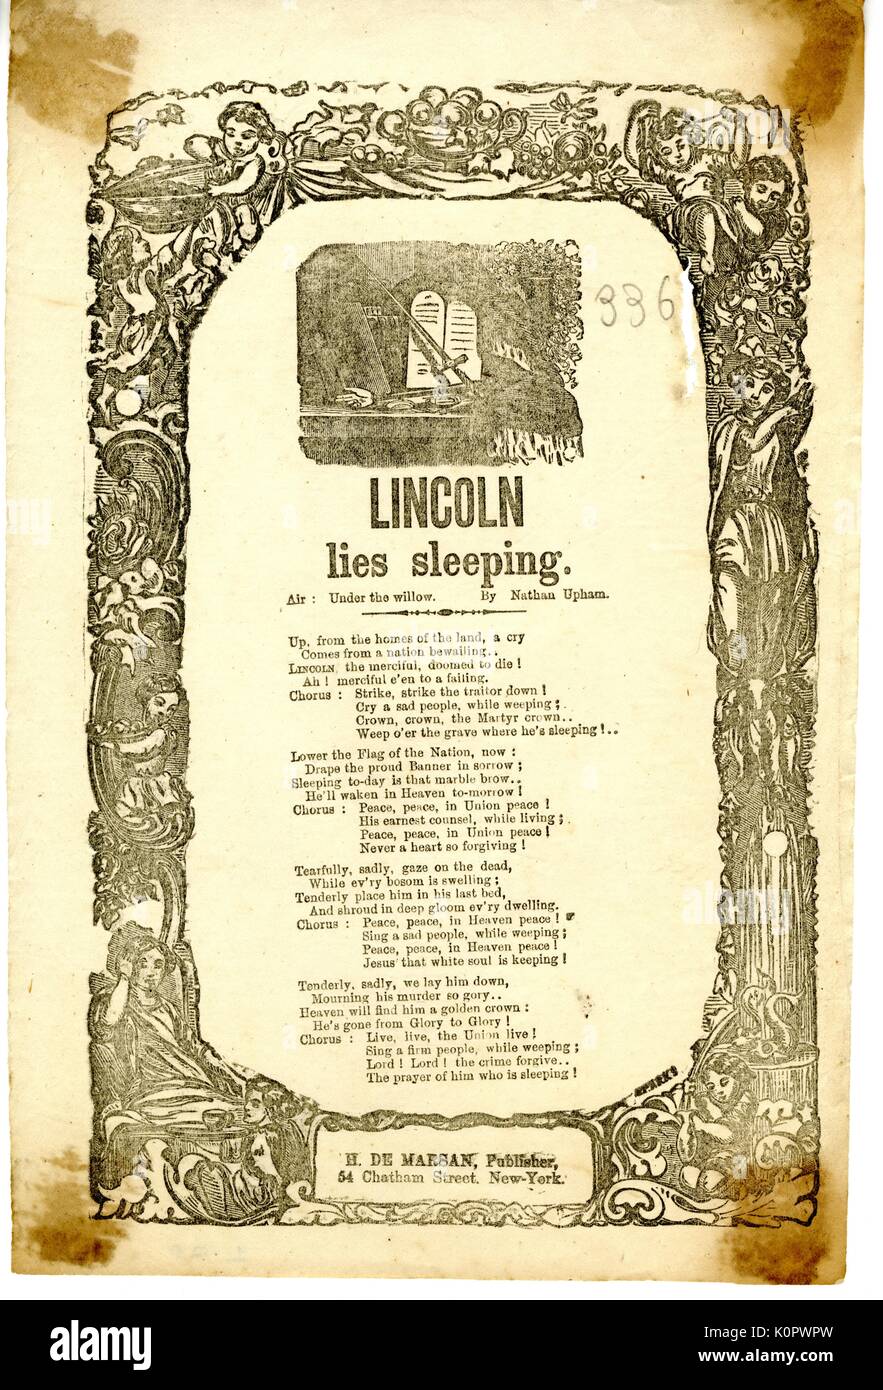 Broadside from the American Civil War, entitled 'Lincoln Lies Sleeping, ' expressing adoration for the late Abraham Lincoln and regret for his murder, New York, New York, 1865. Stock Photo